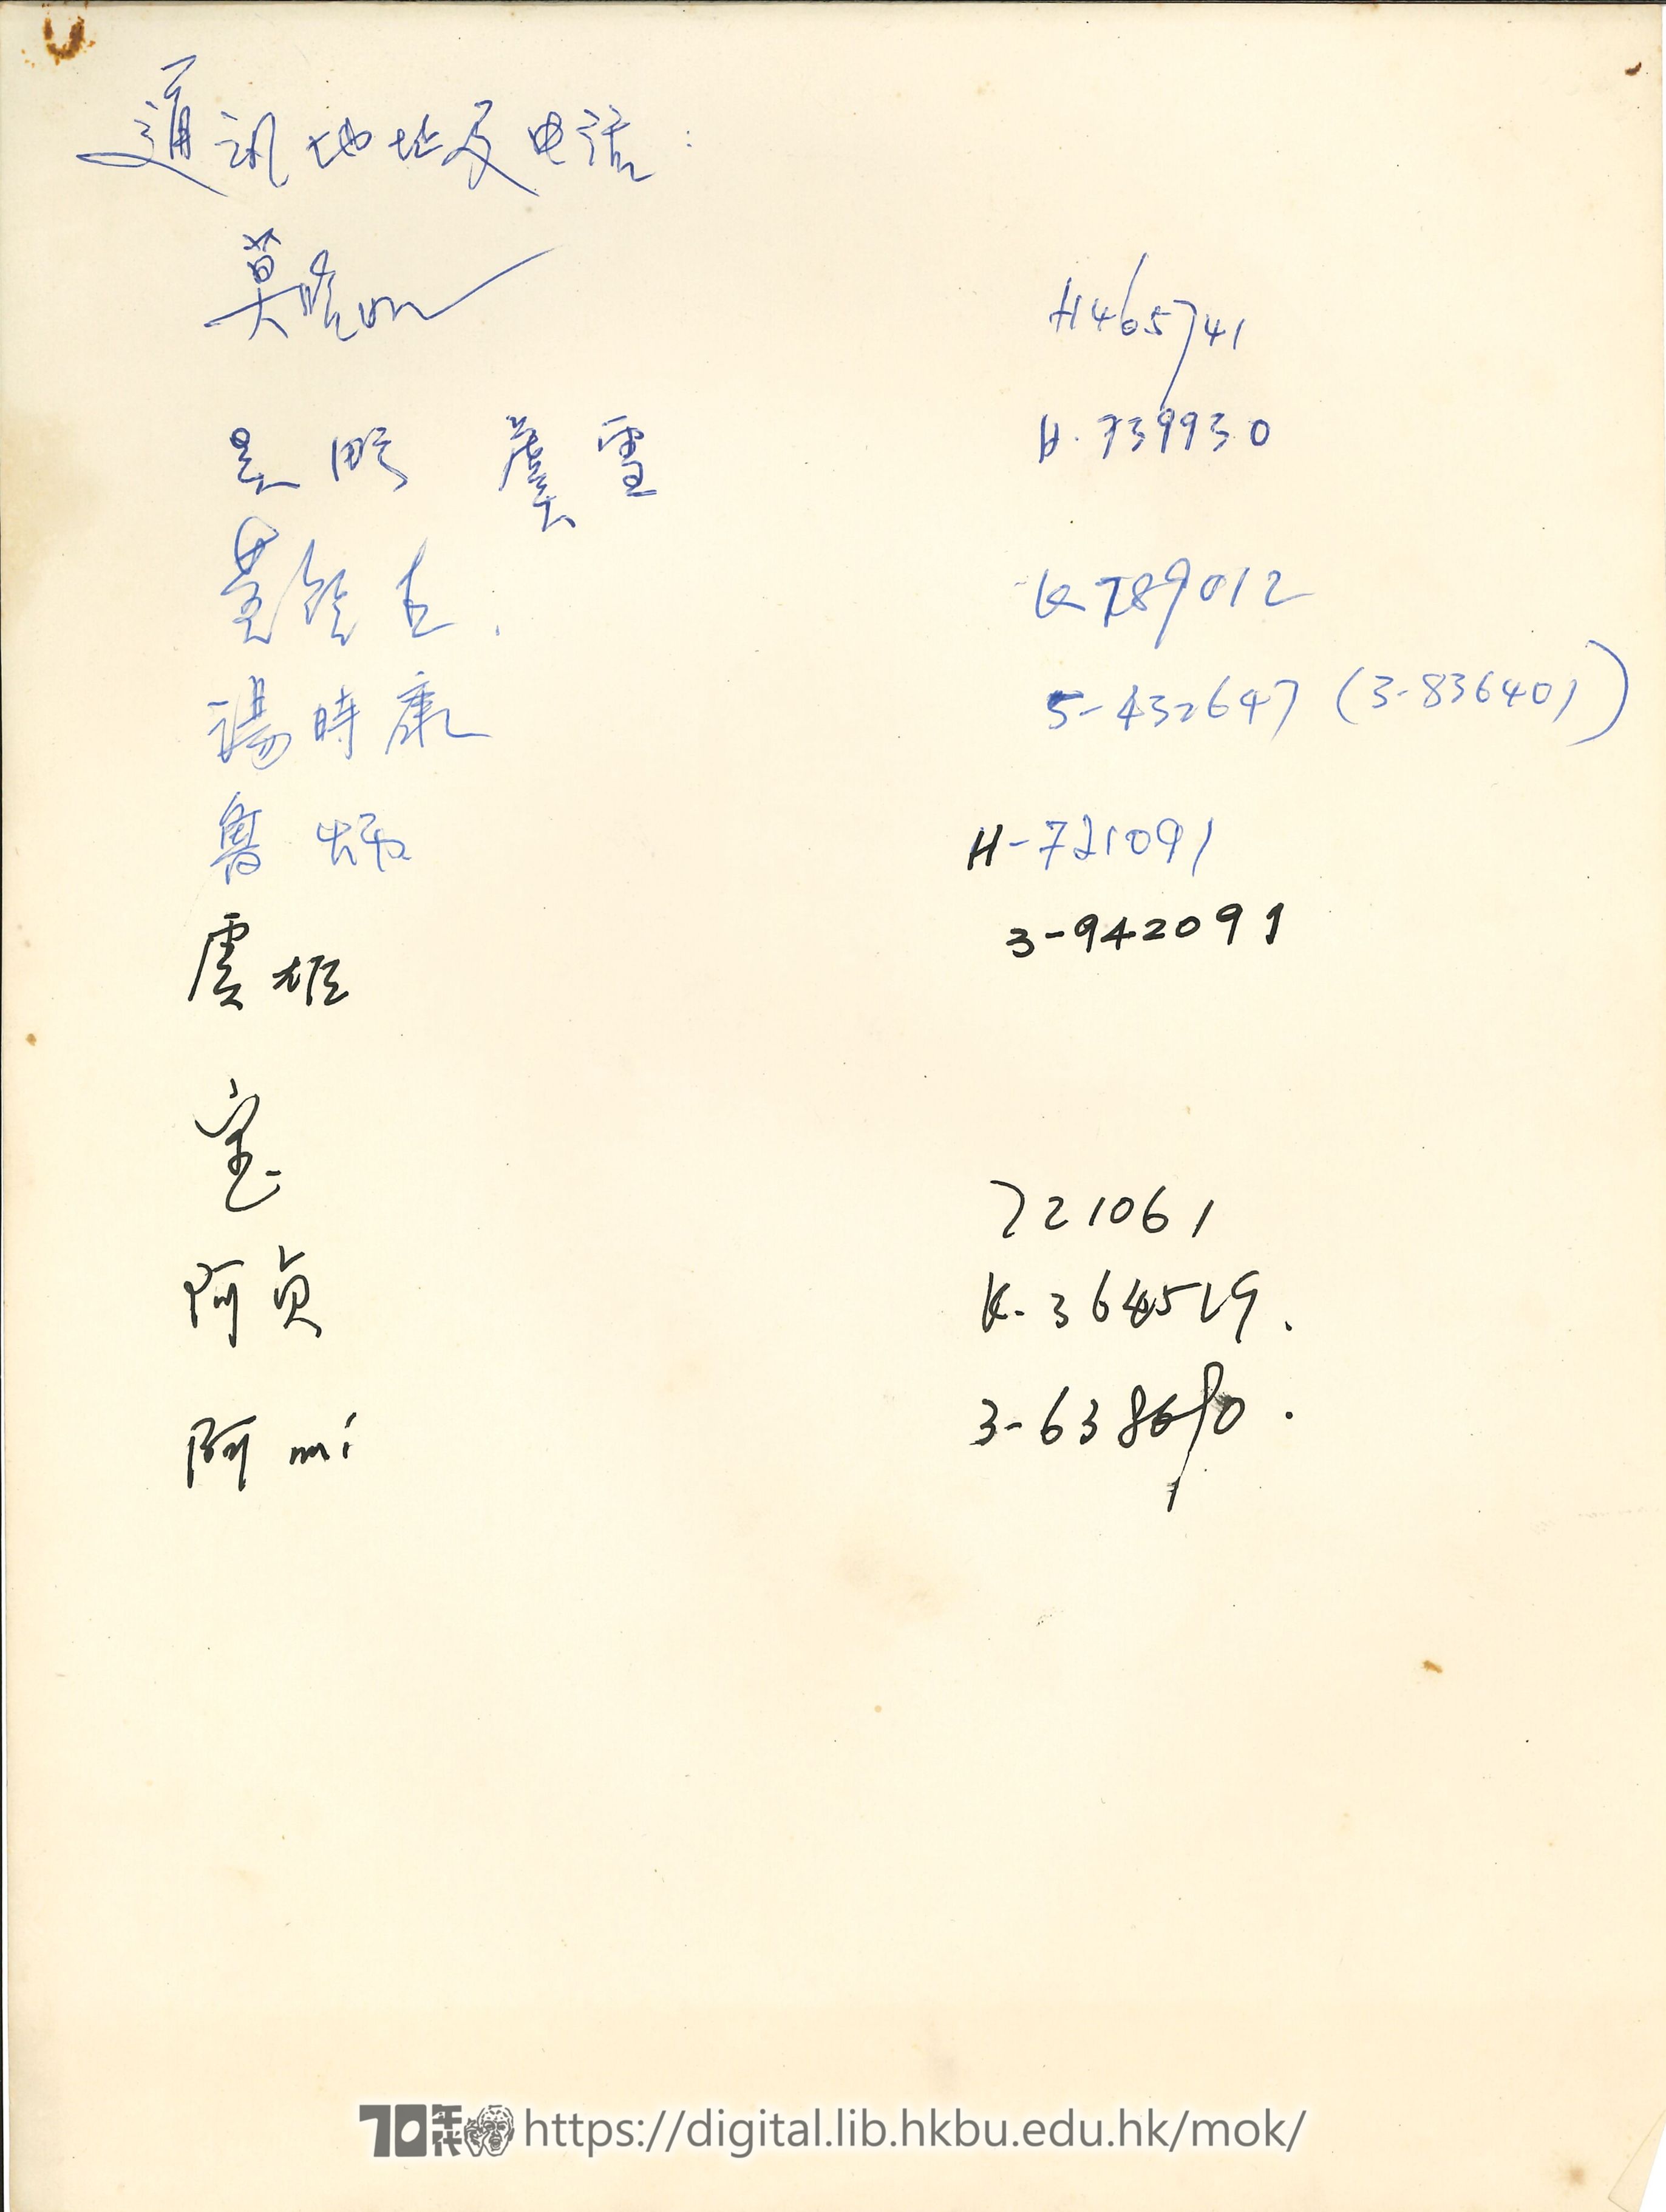   Record of Free Li & Yang Action Committee meeting  